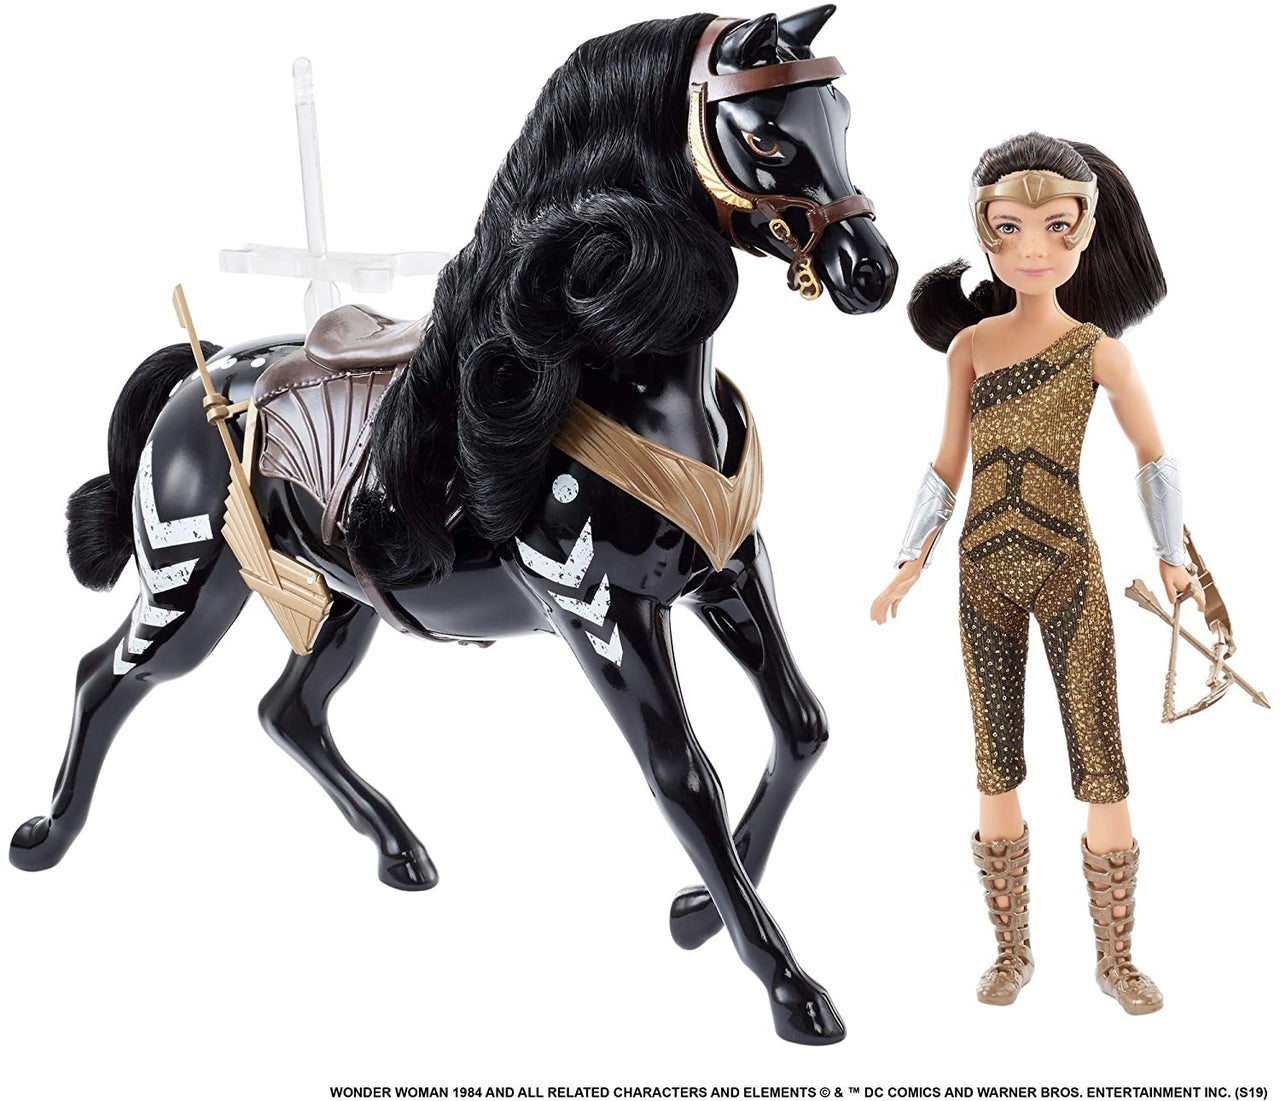 Mattel Wonder Woman 84 Young Diana Doll & Horse Action Figure